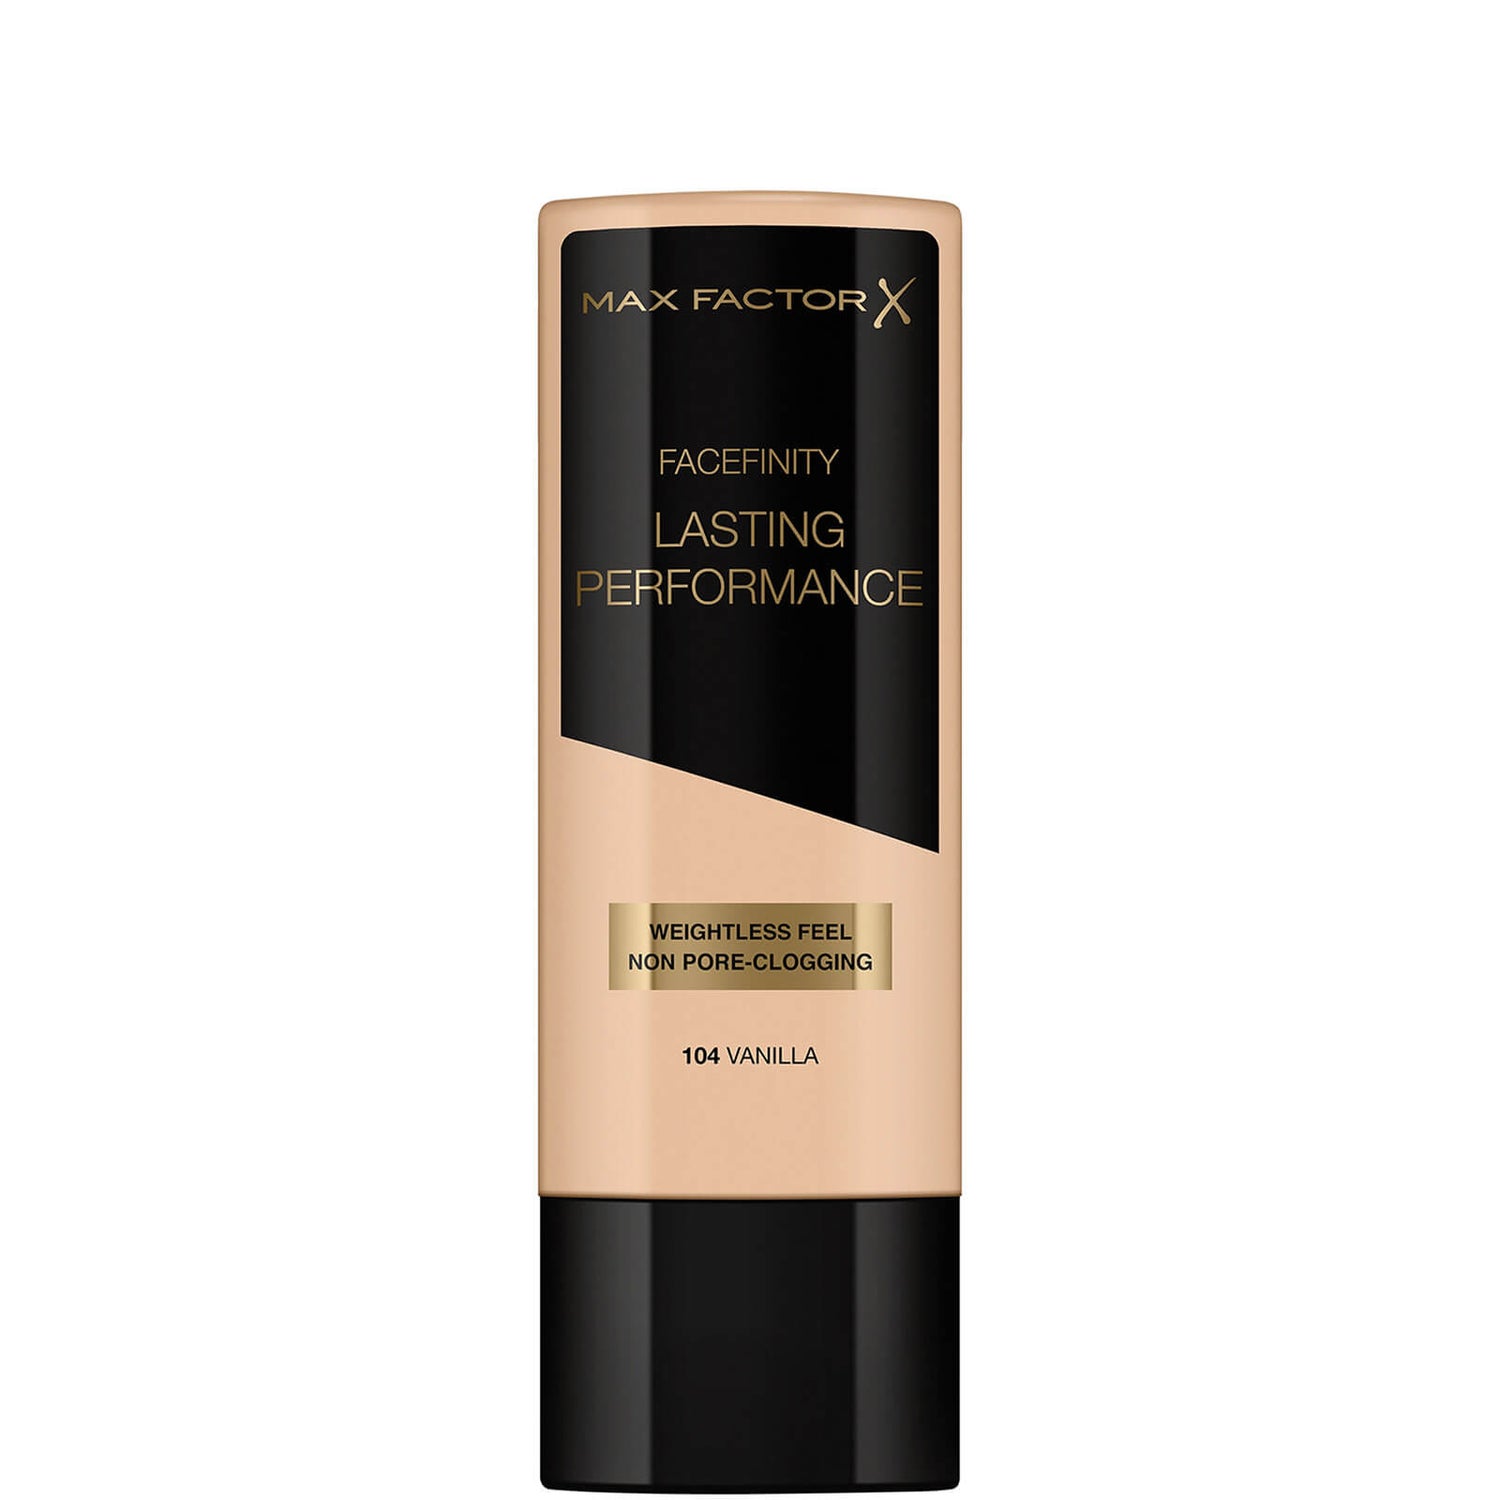 Max Factor Lasting Performance Restage 35g (Various Shades)